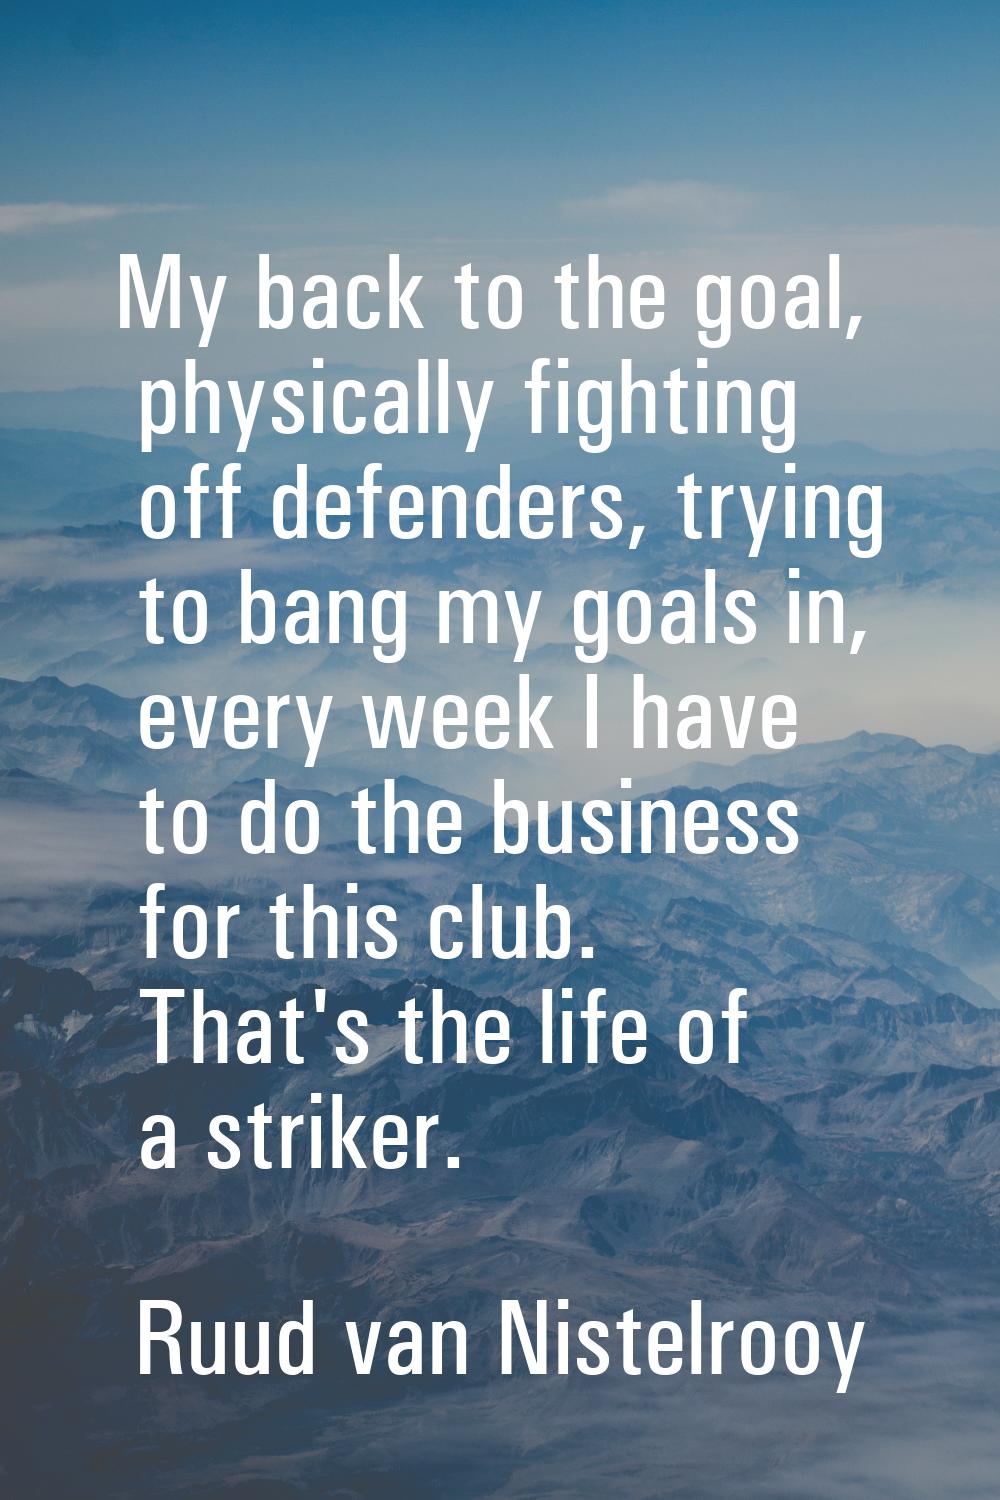 My back to the goal, physically fighting off defenders, trying to bang my goals in, every week I ha